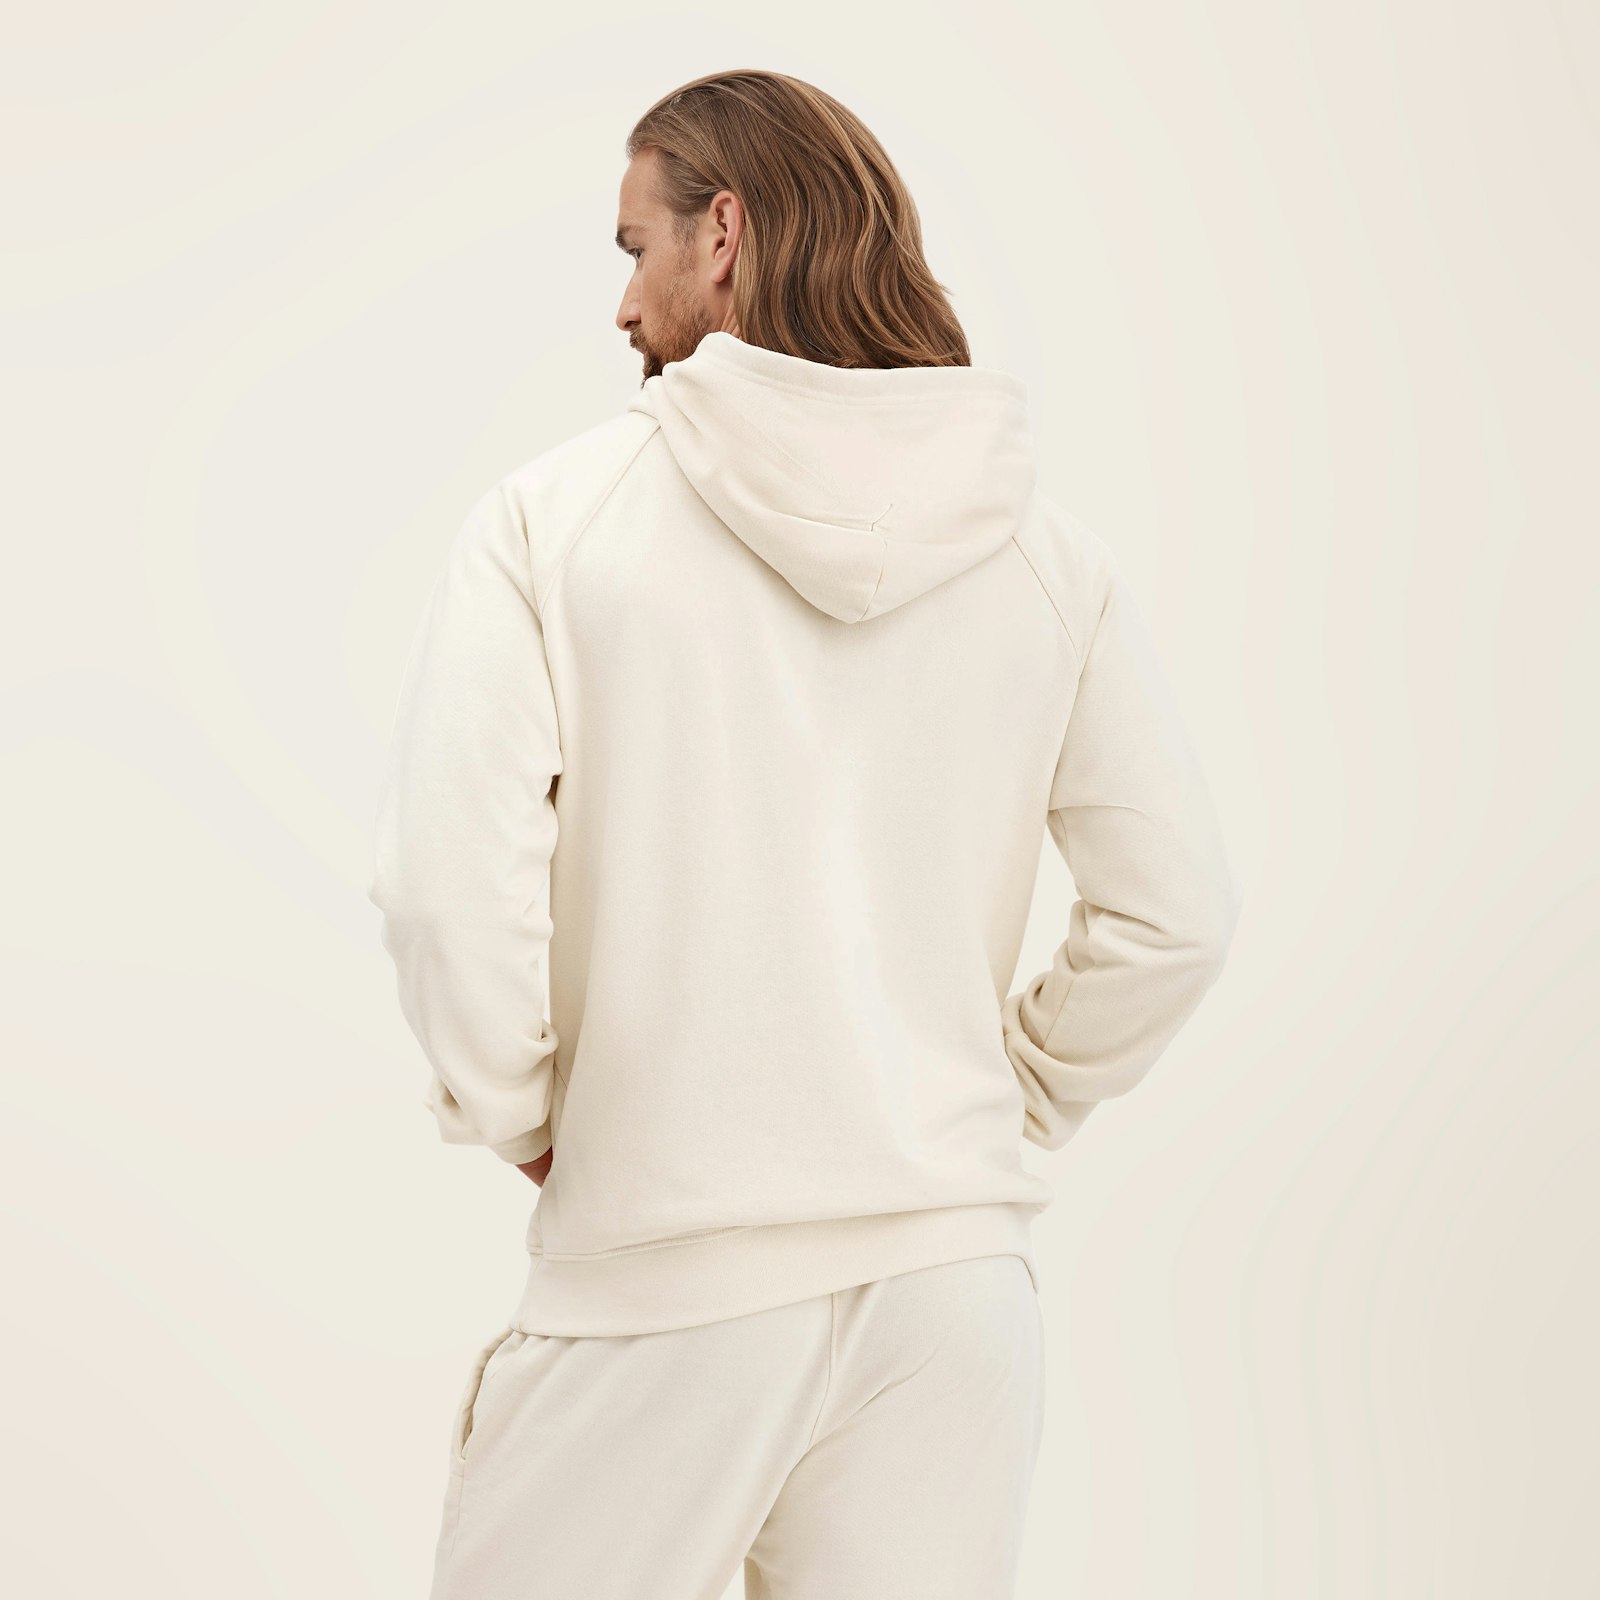 UnisexRecycledTerryHoodie_OffWhite_Mens_OnFigure_1x1_0985.jpg